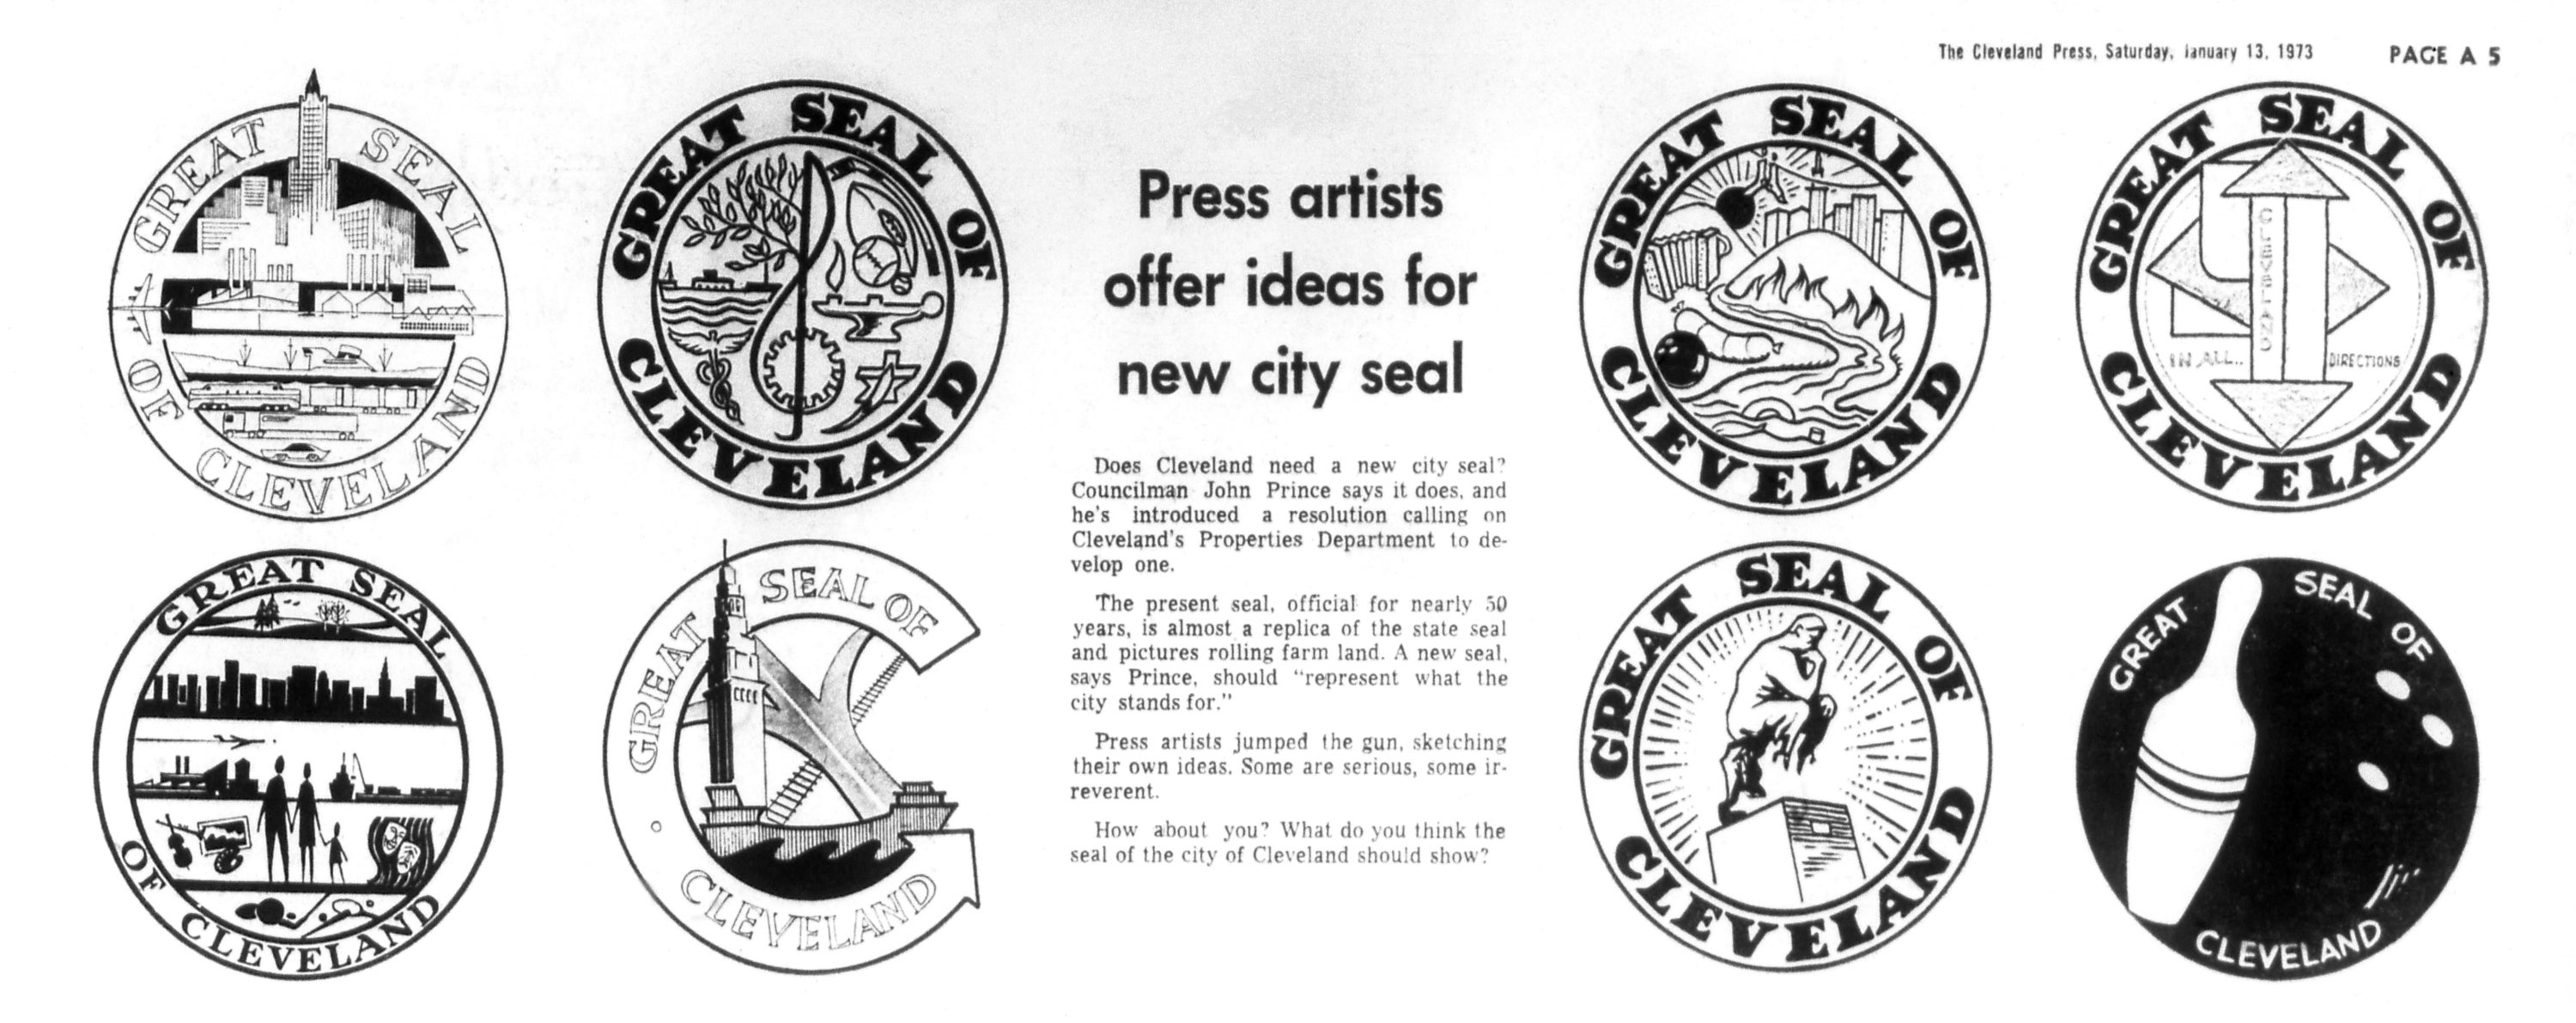 Cleveland city seals, as designed by the artists of the Cleveland Press, January 13, 1973